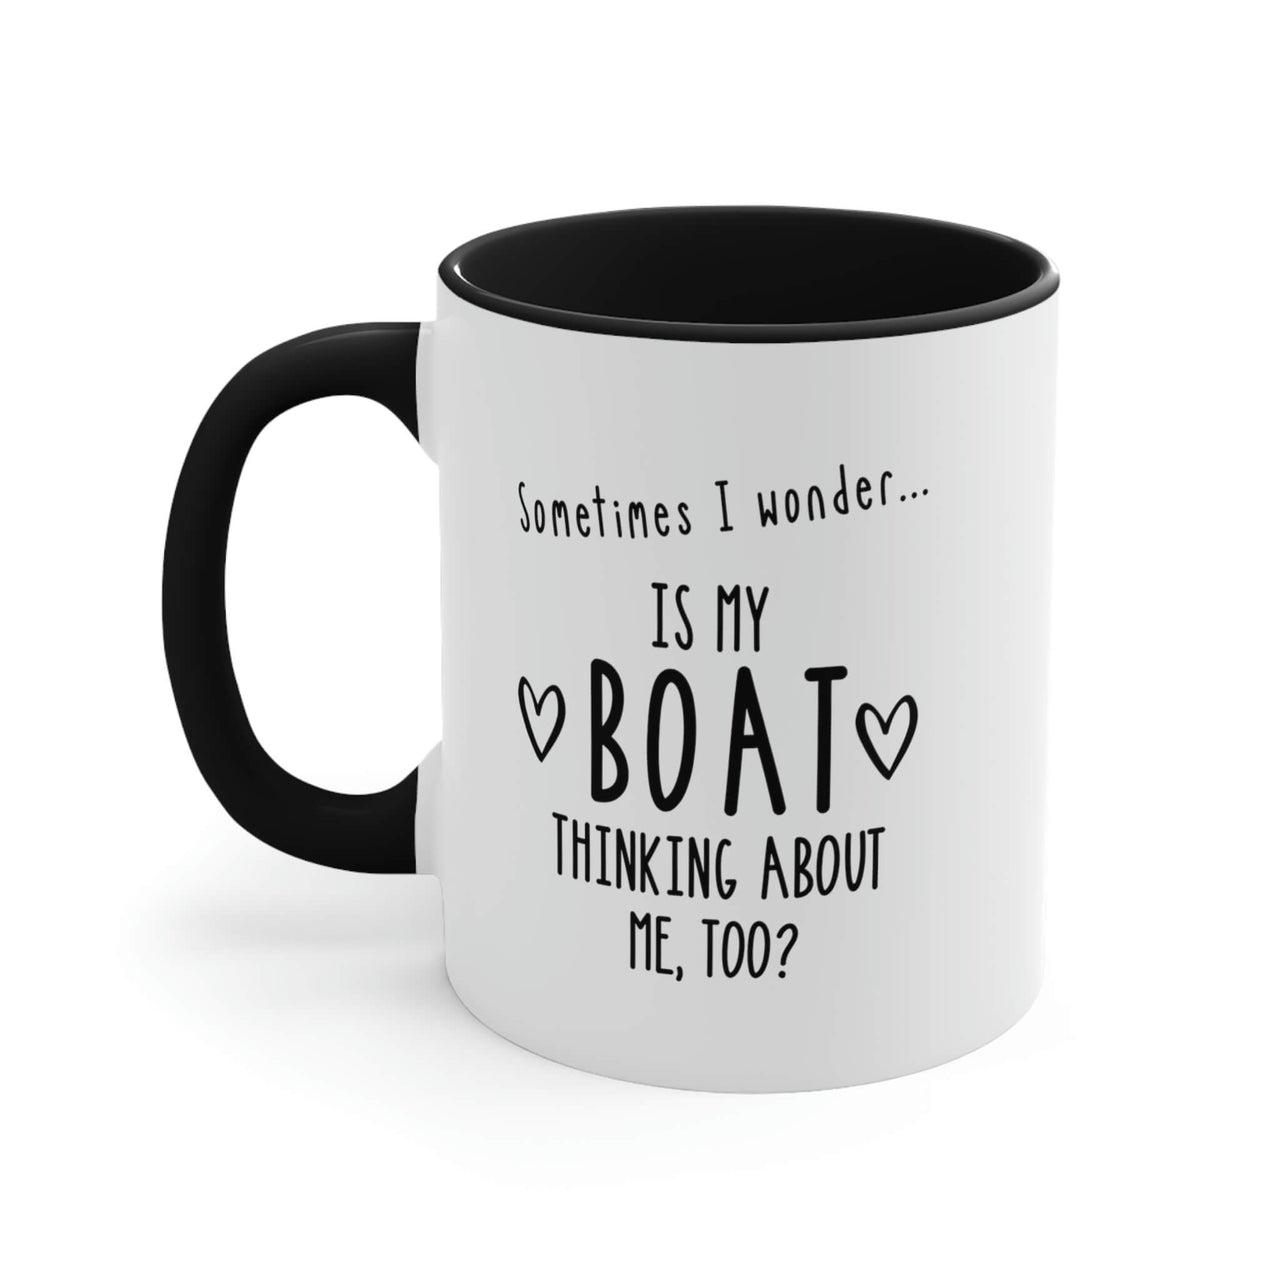 Is My Boat Thinking About Me Too Ceramic Coffee Mug, 5 Colors Mugs New England Trading Co Black  